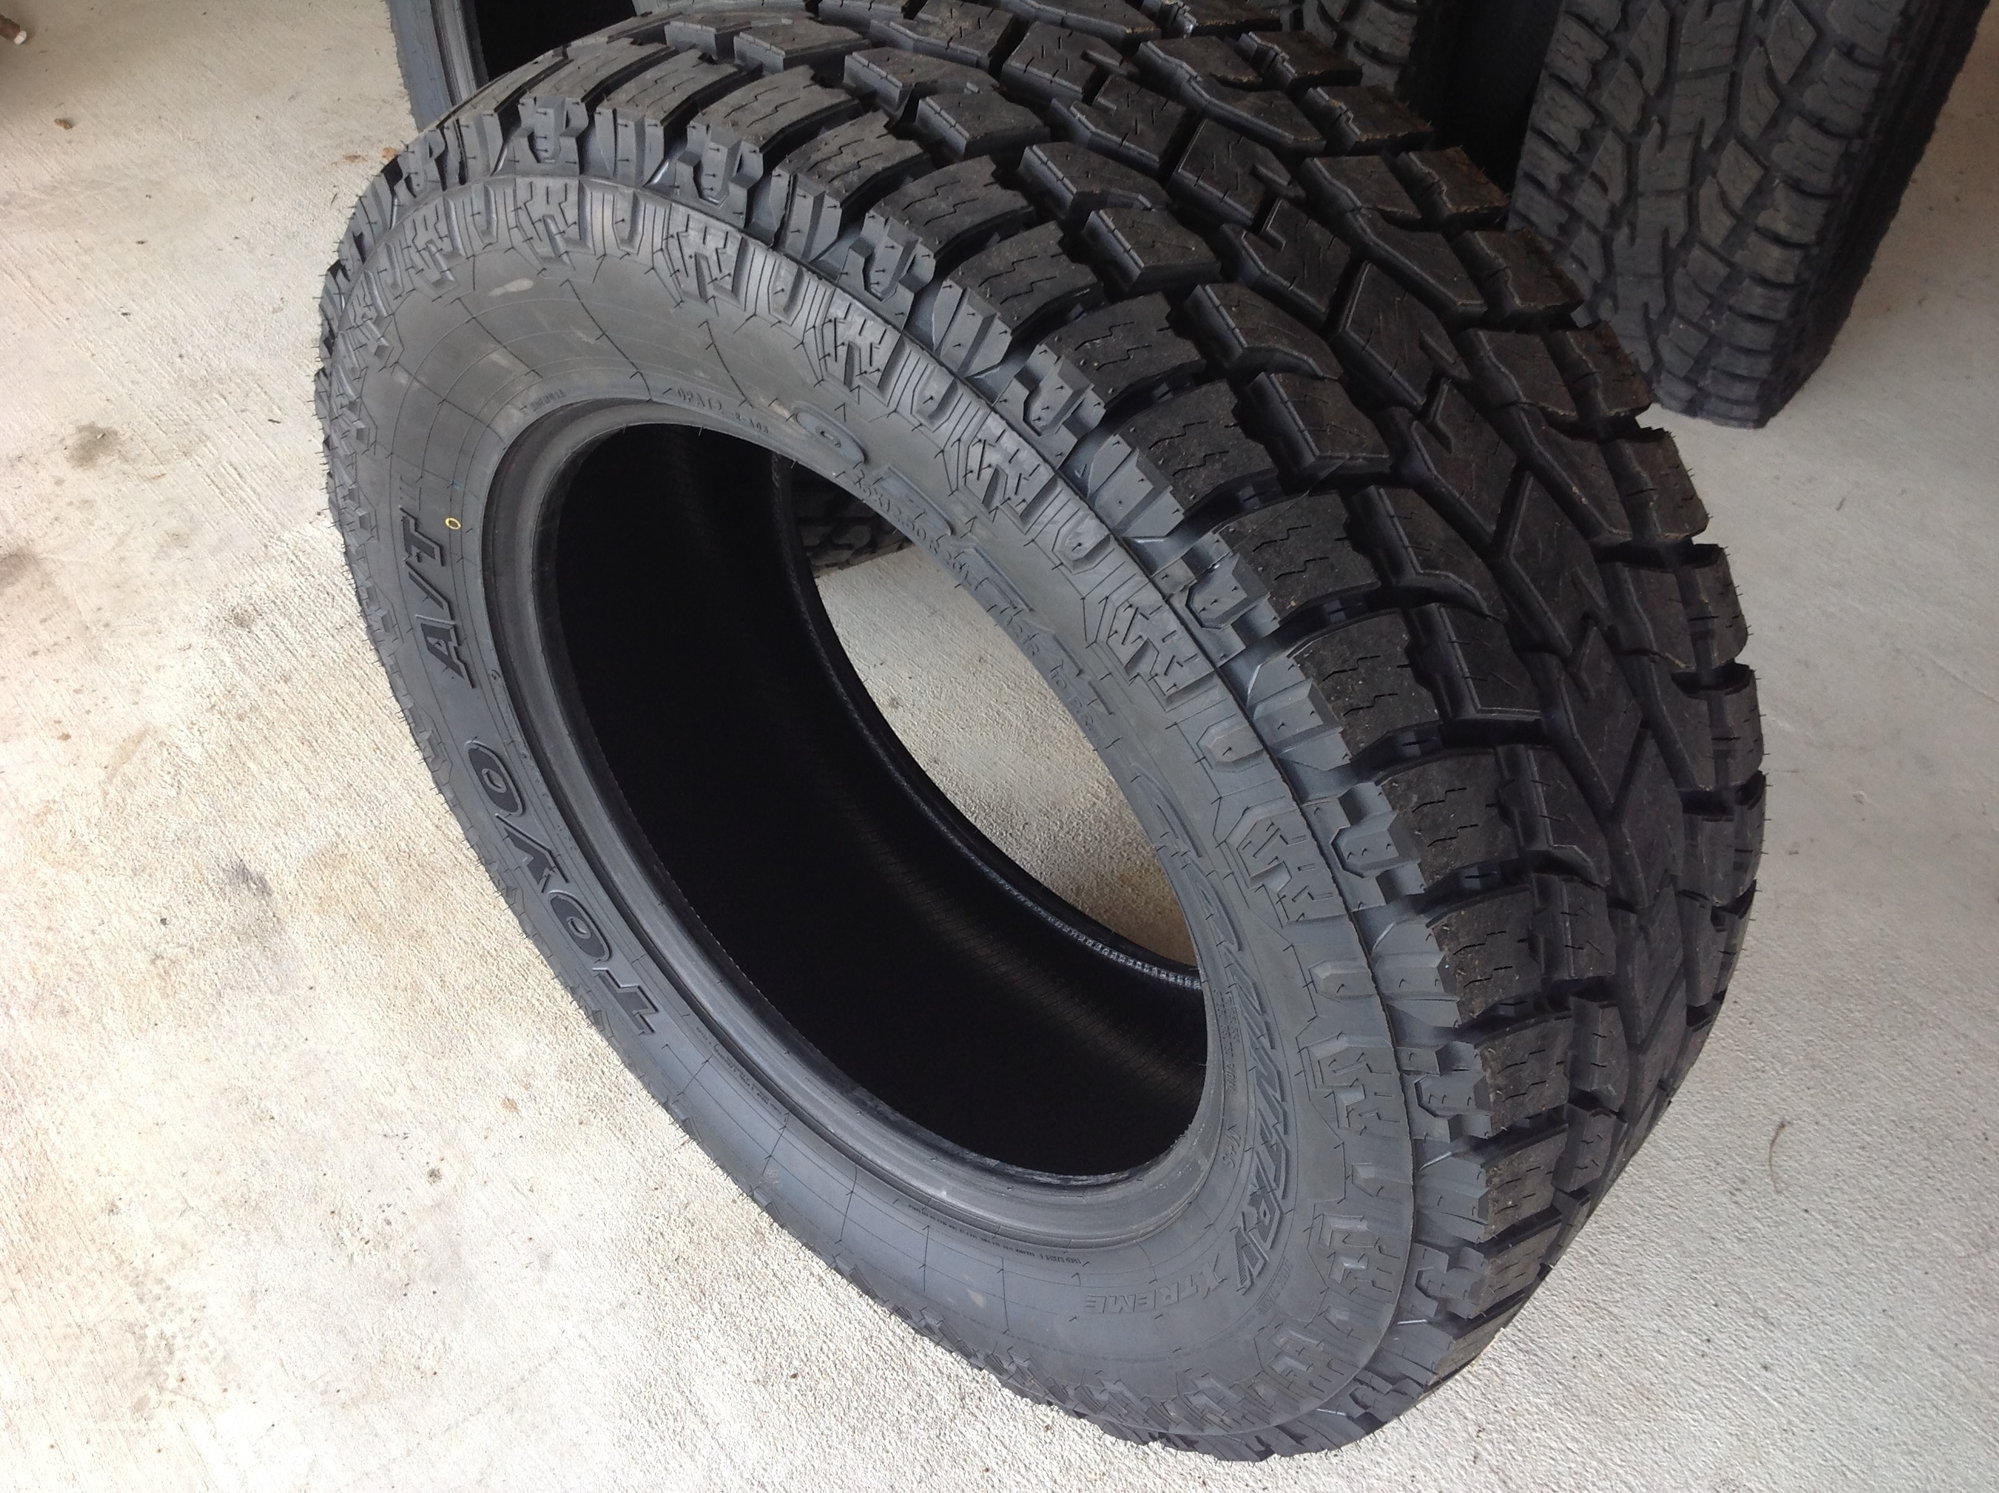 I ordered 295/65r20 toyo at iis from discount tire, waited 10 days and they...